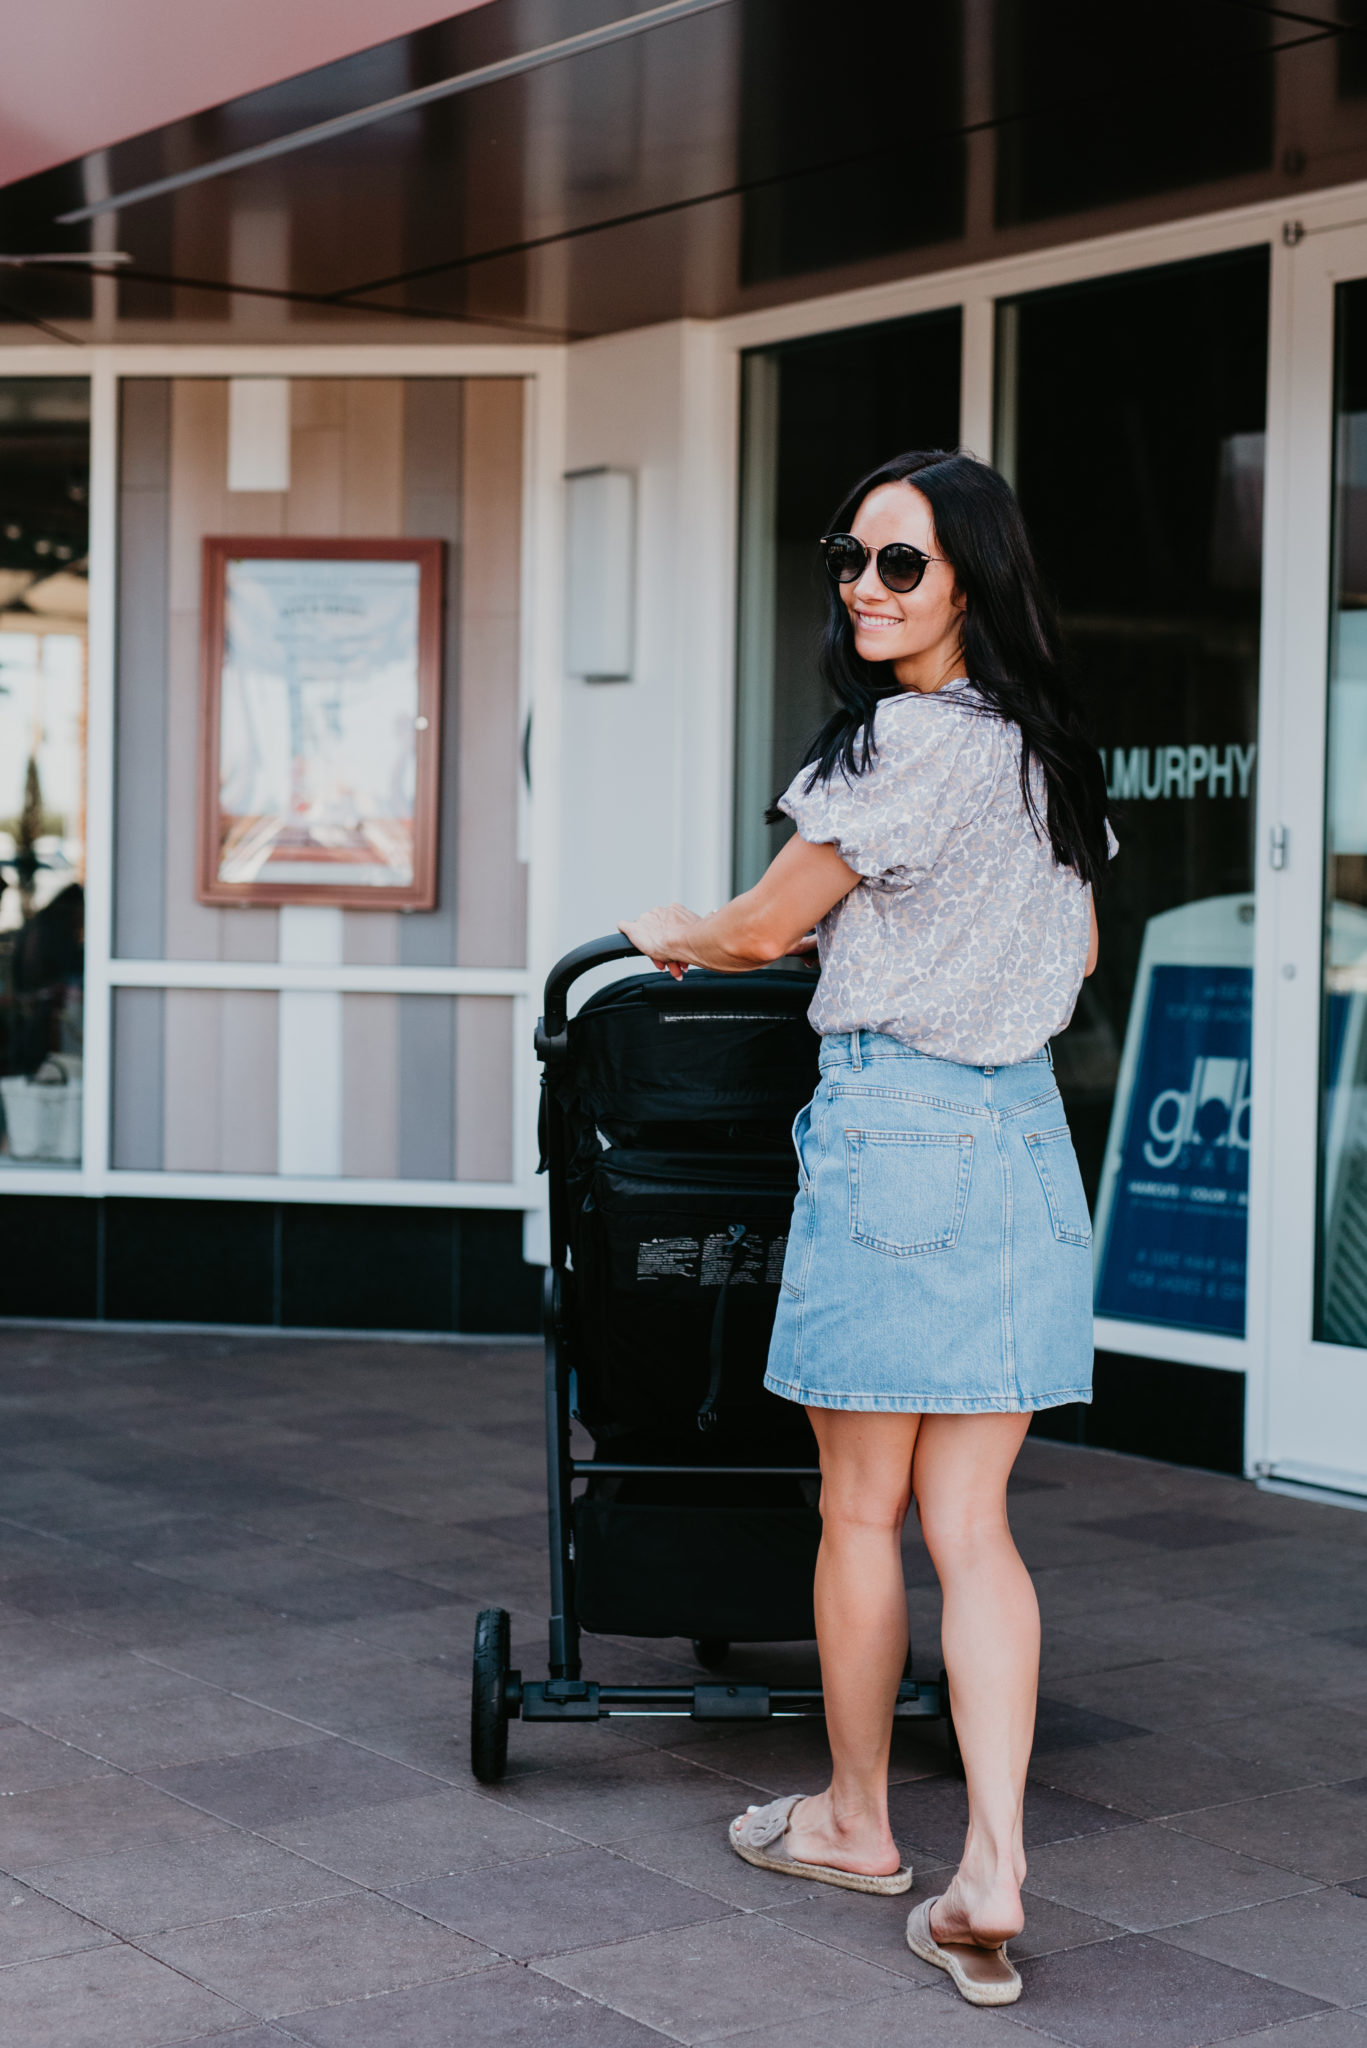 Family summer fun featured by top US life and style blog, Outfits & OutingsL image of a woman pushing the Baby Jogger city mini GT2